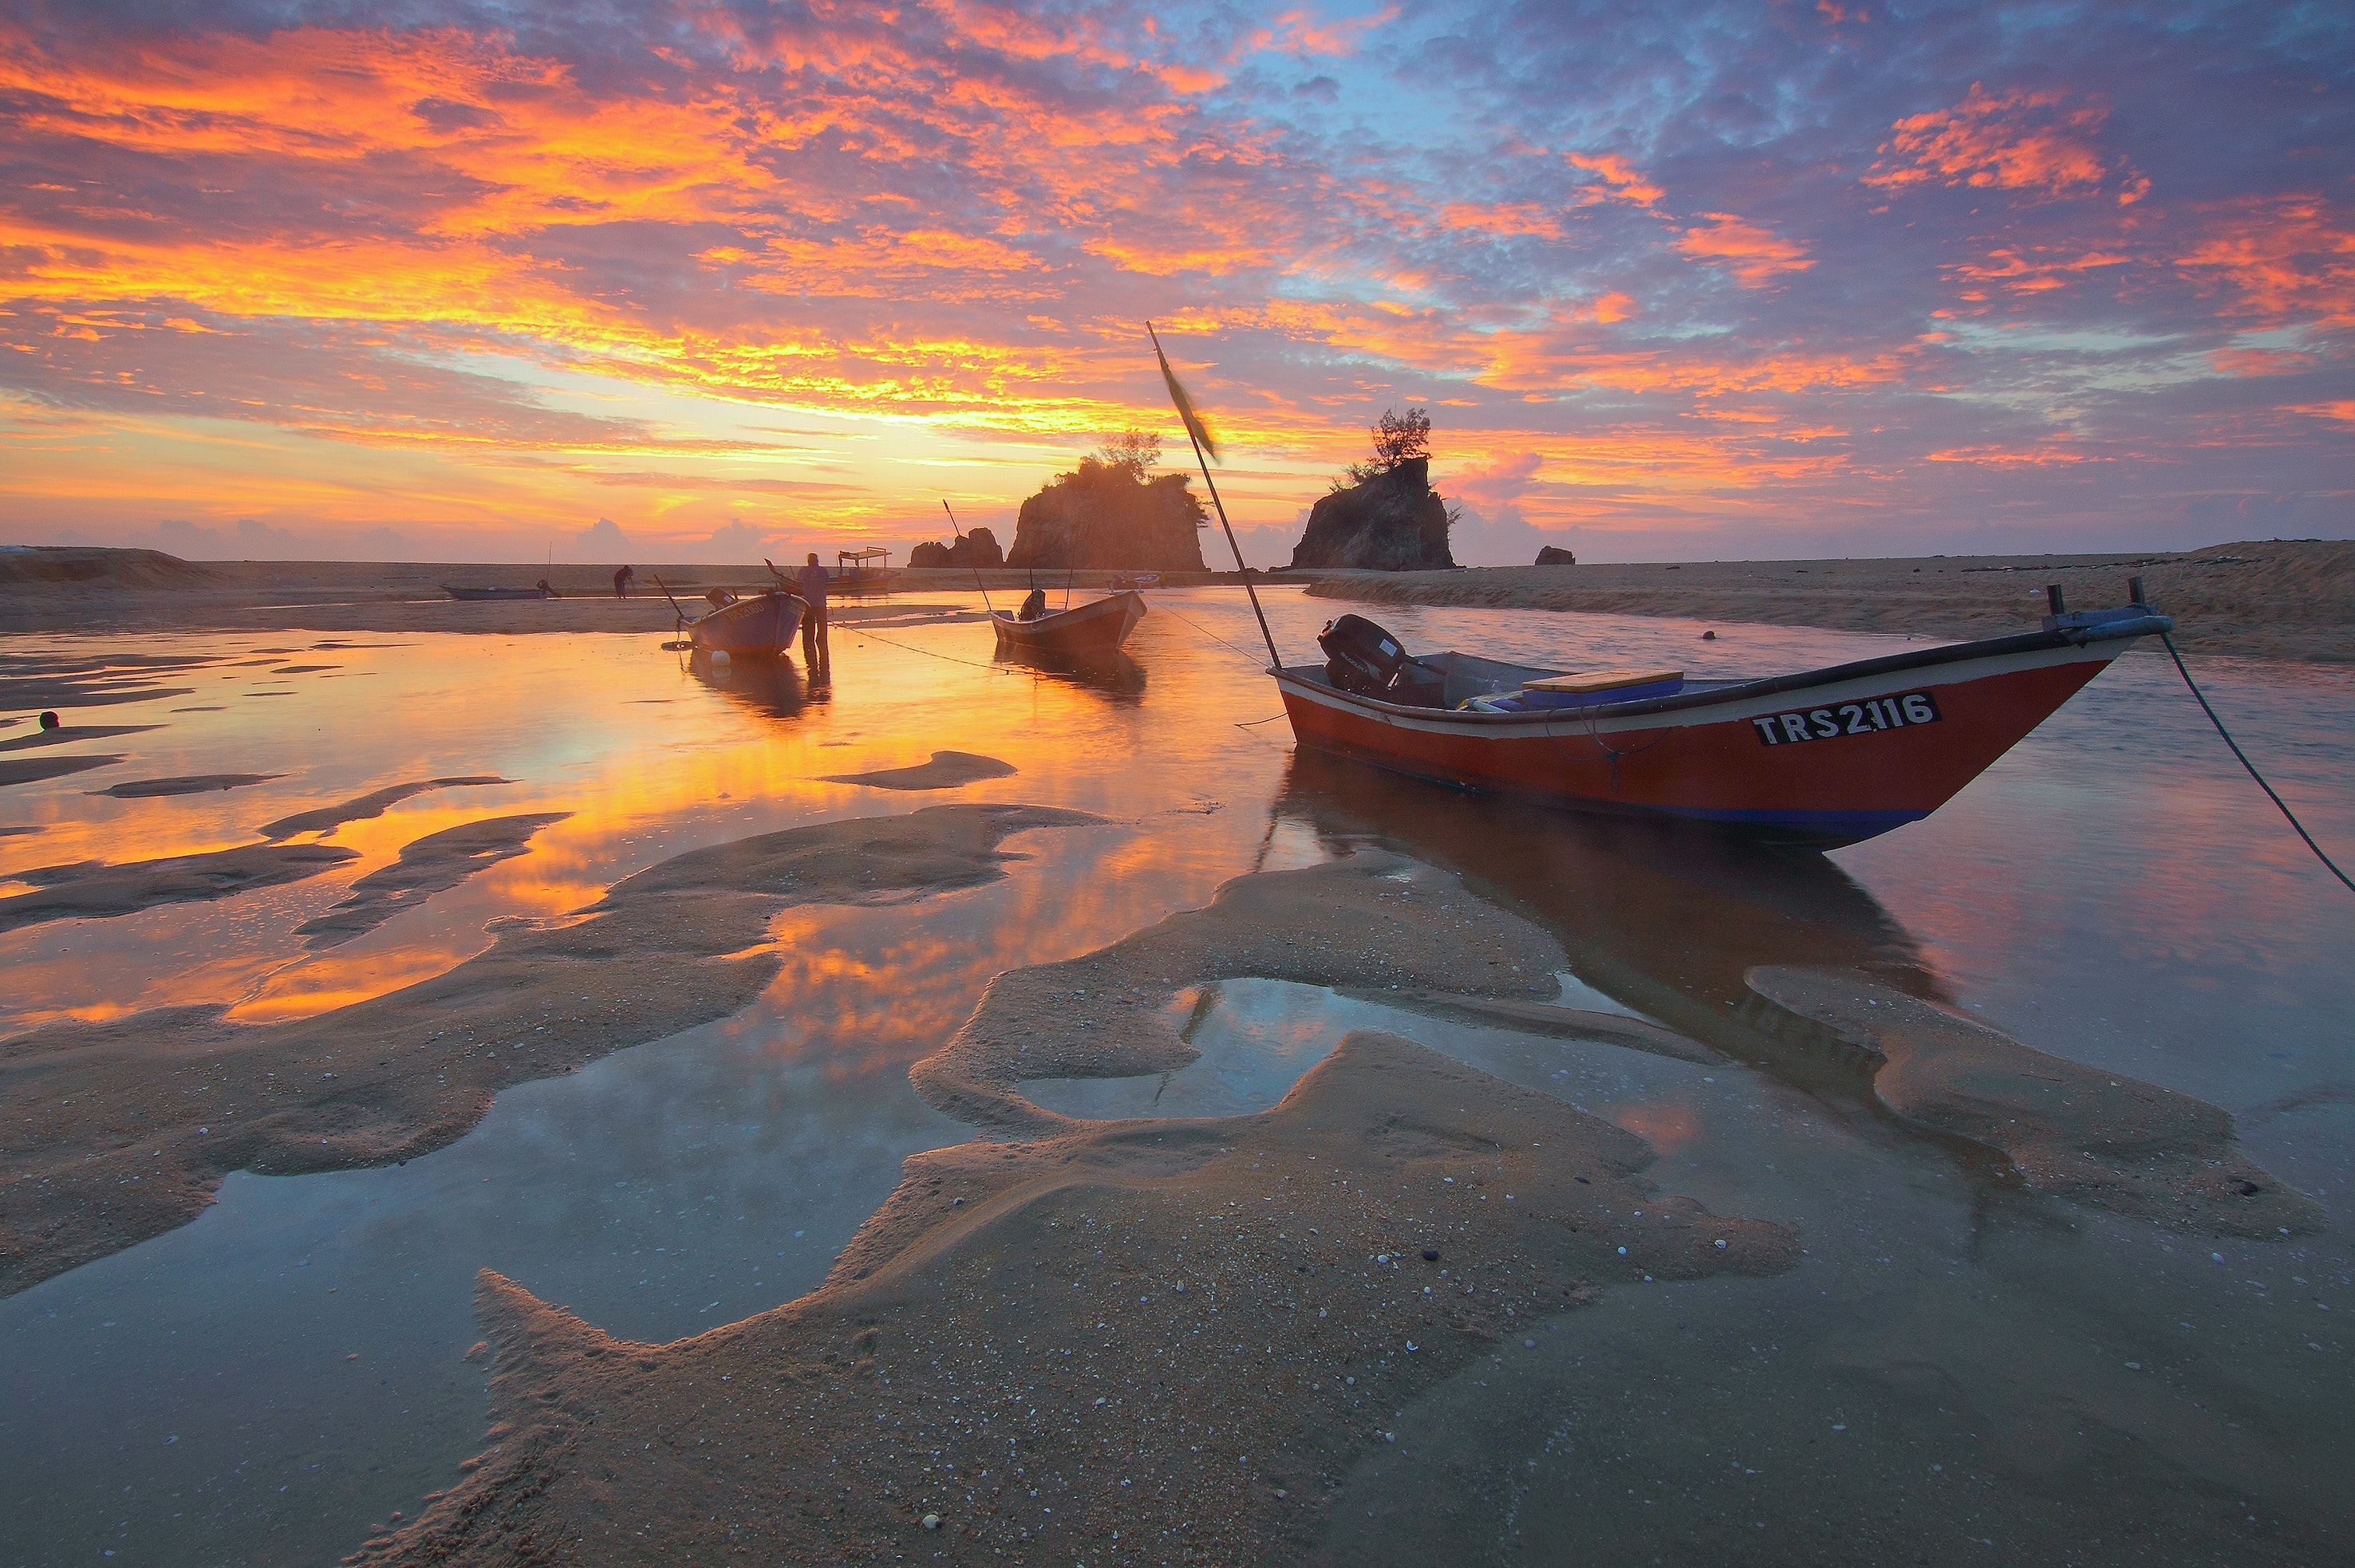 Low tide during sunset photo